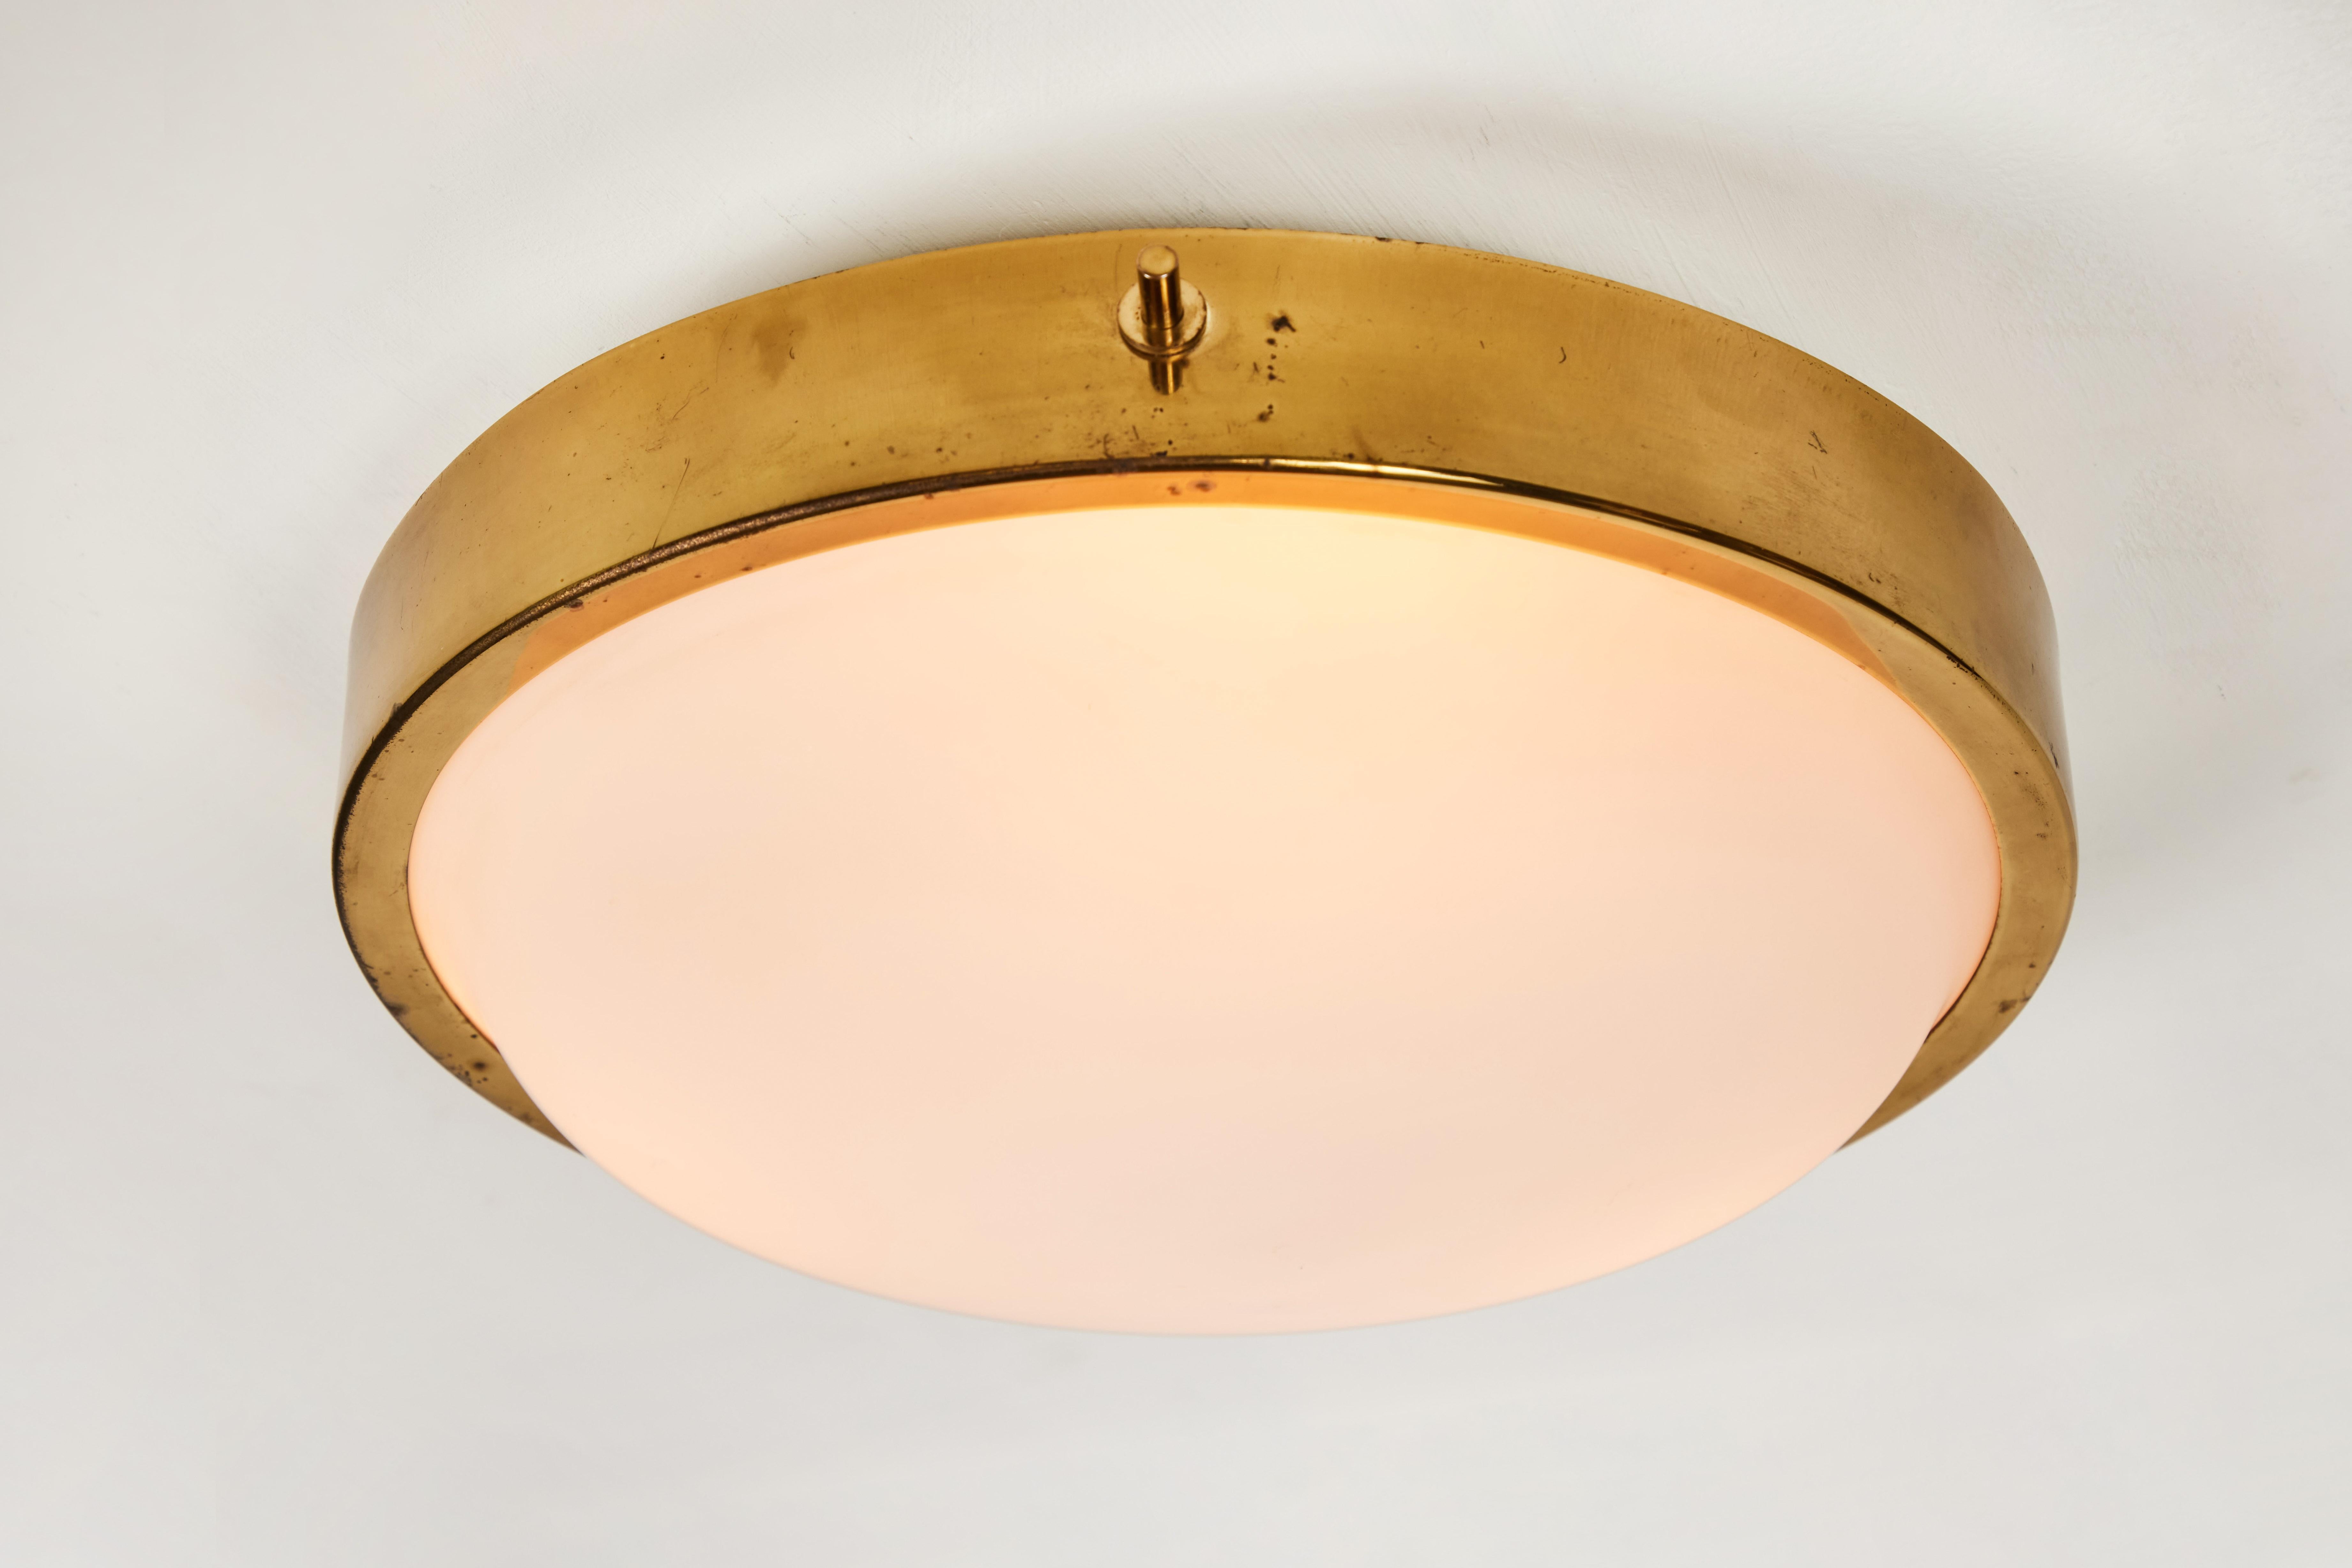 1950s brass and glass ceiling light by Oscar Torlasco for Lumi. Executed in sculpturally curved opaline glass and brass. A highly refined design reminiscent of the work of Bruno Gatta for Stilnovo.

Lumi was one of the most innovative lighting